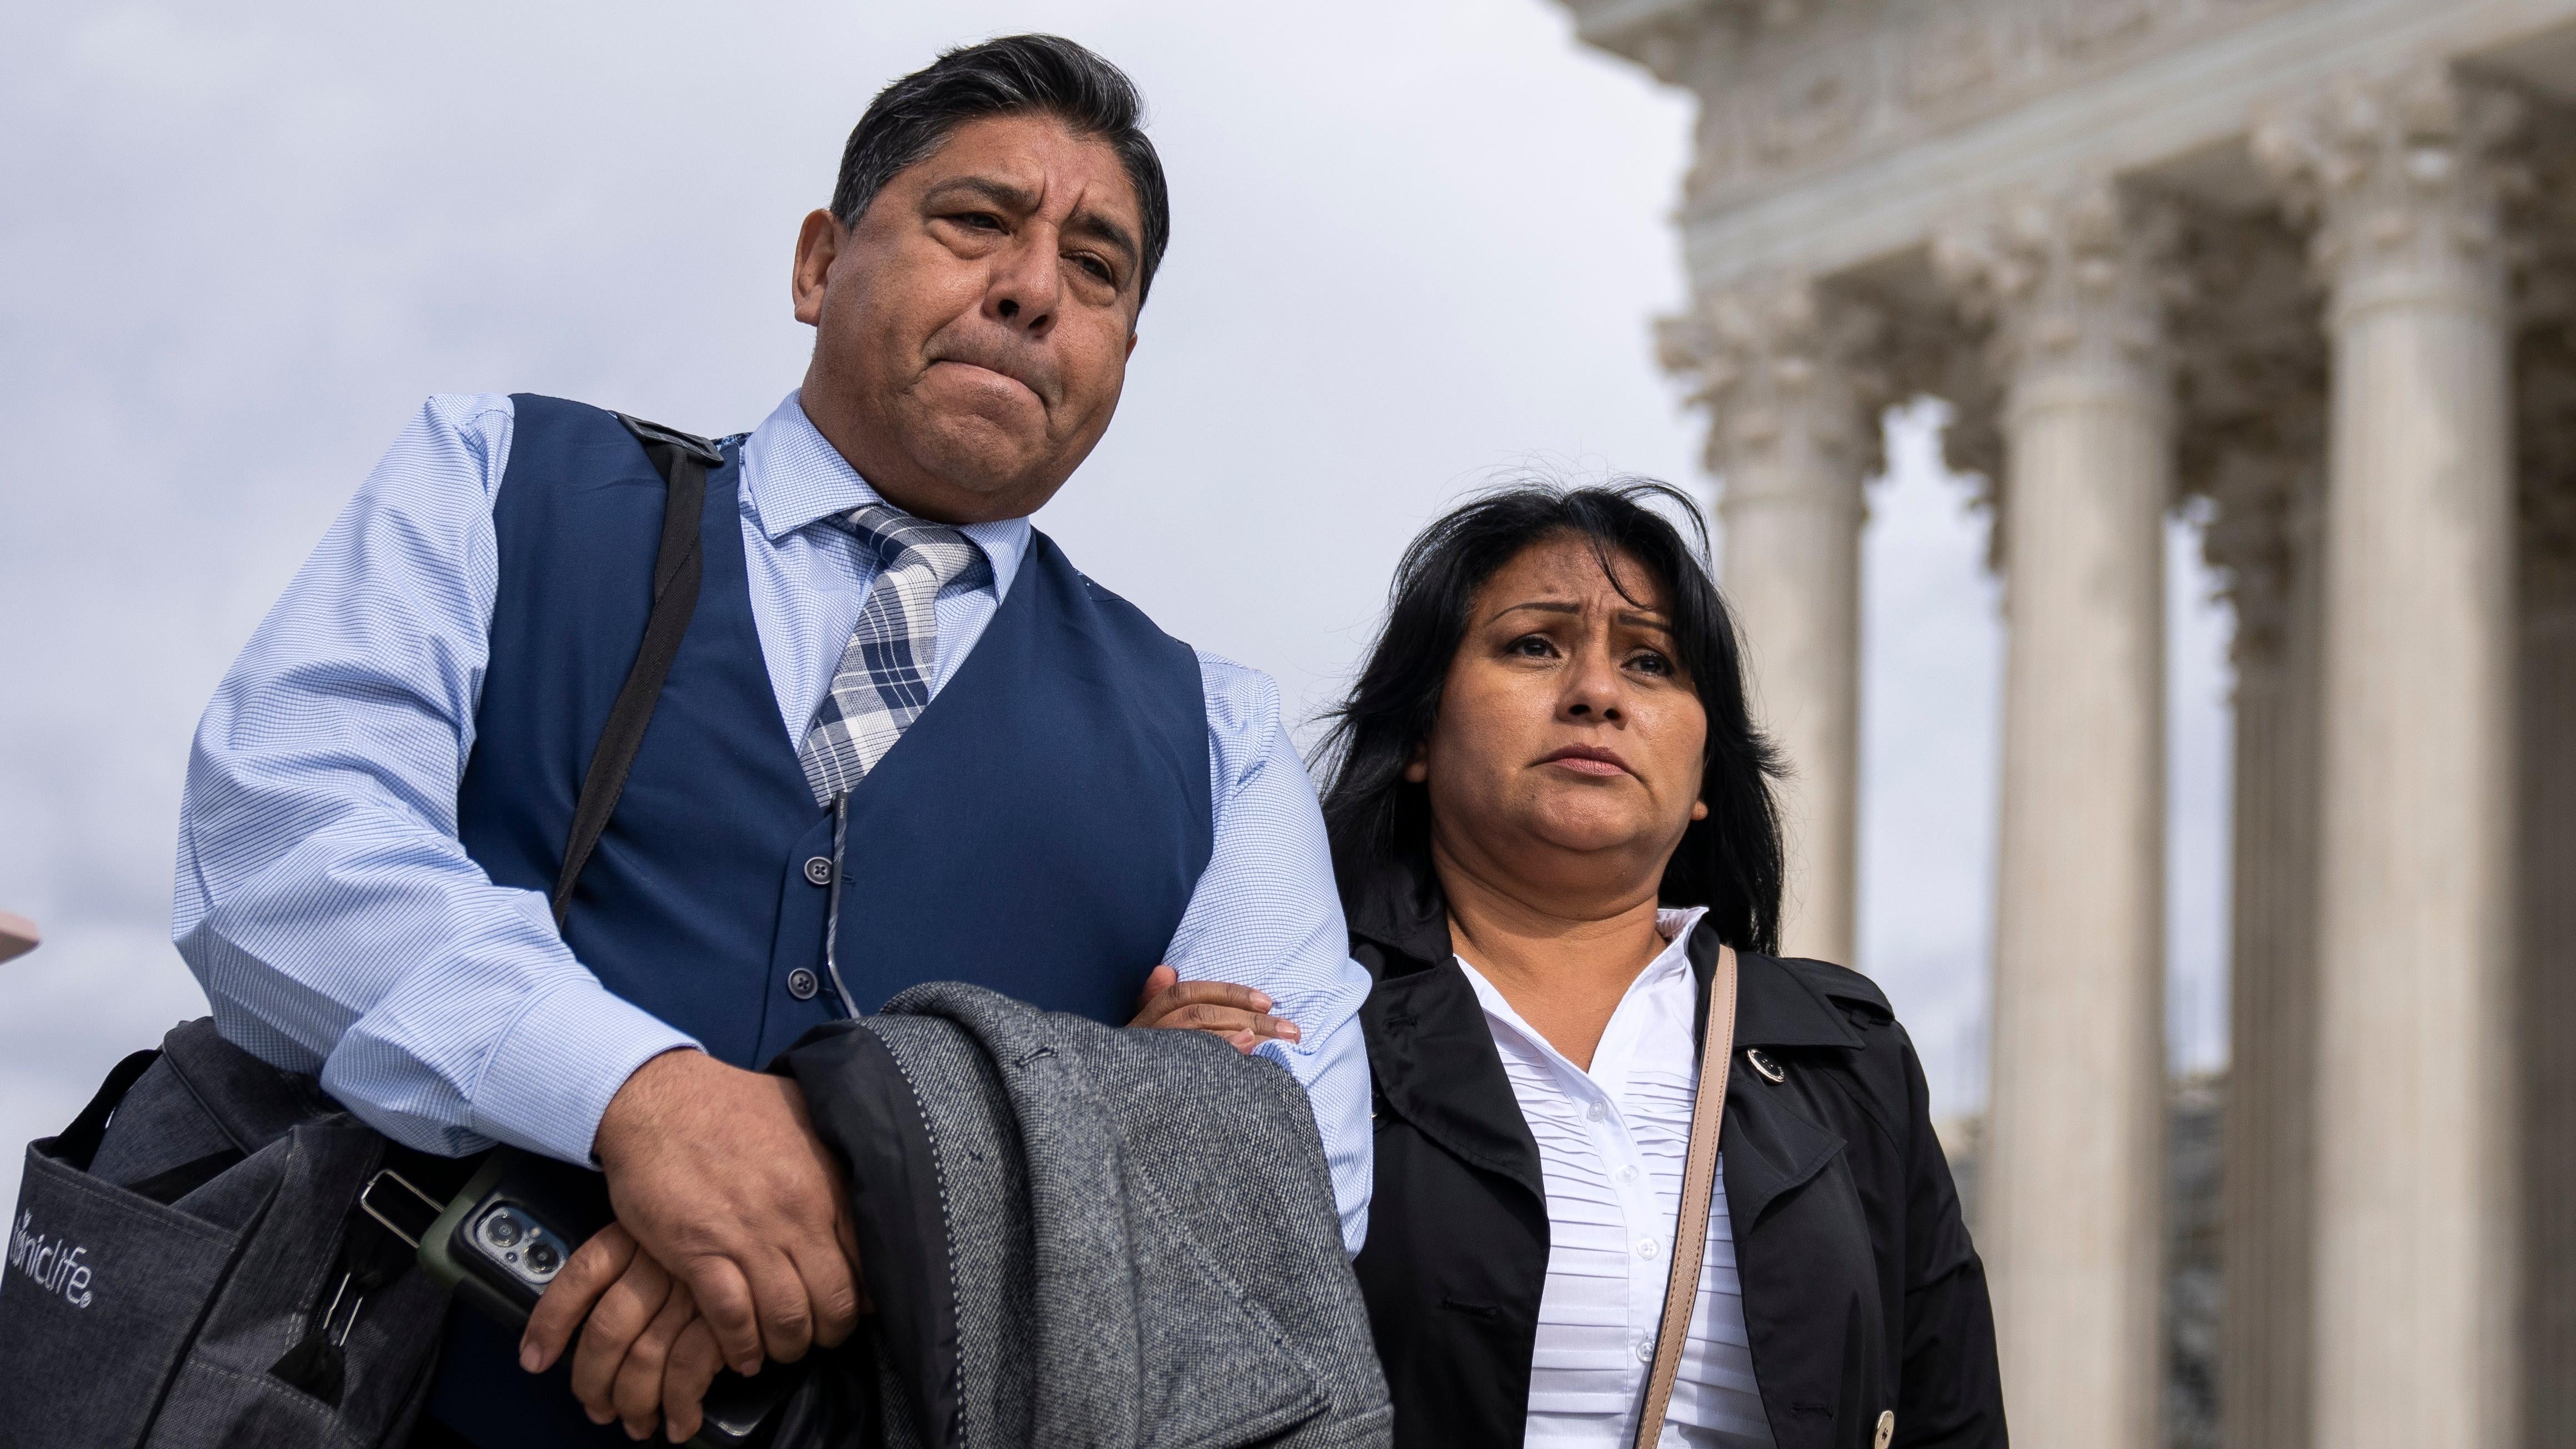 Jose Hernandez and Beatriz Gonzalez, stepfather and mother of Nohemi Gonzalez, who died in a terrorist attack in Paris in 2015, arrive to speak to the press outside of the U.S. Supreme Court following oral arguments in Gonzalez v. Google February 21, 2023 in Washington, DC. (Photo: Drew Angerer, Getty Images)